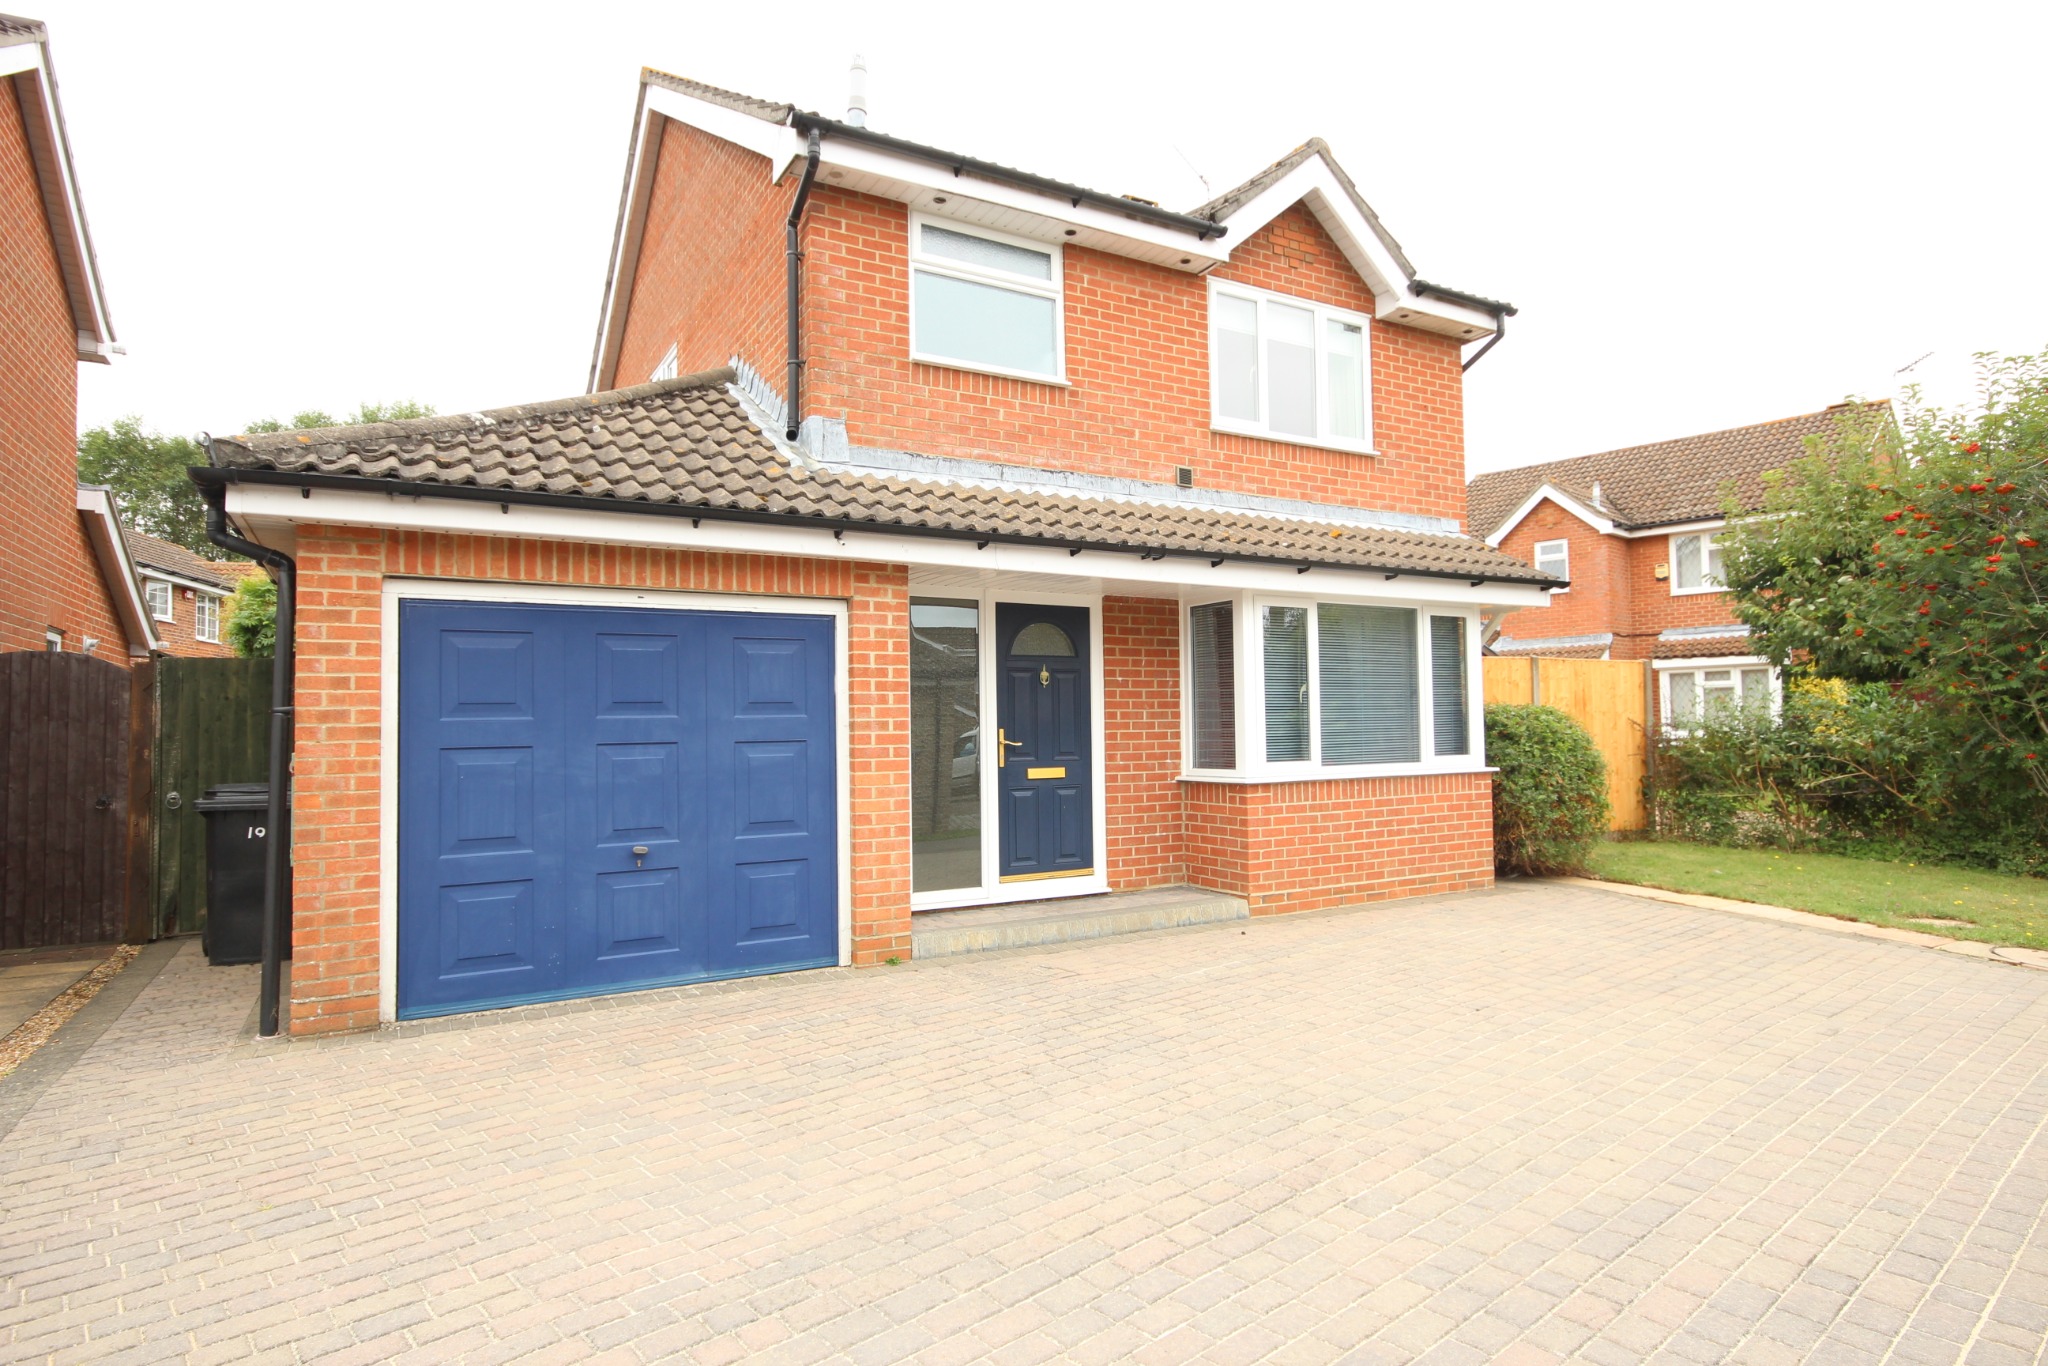 3 bed Detached House for rent in Waterlooville. From Pearsons Estate Agents - Waterlooville